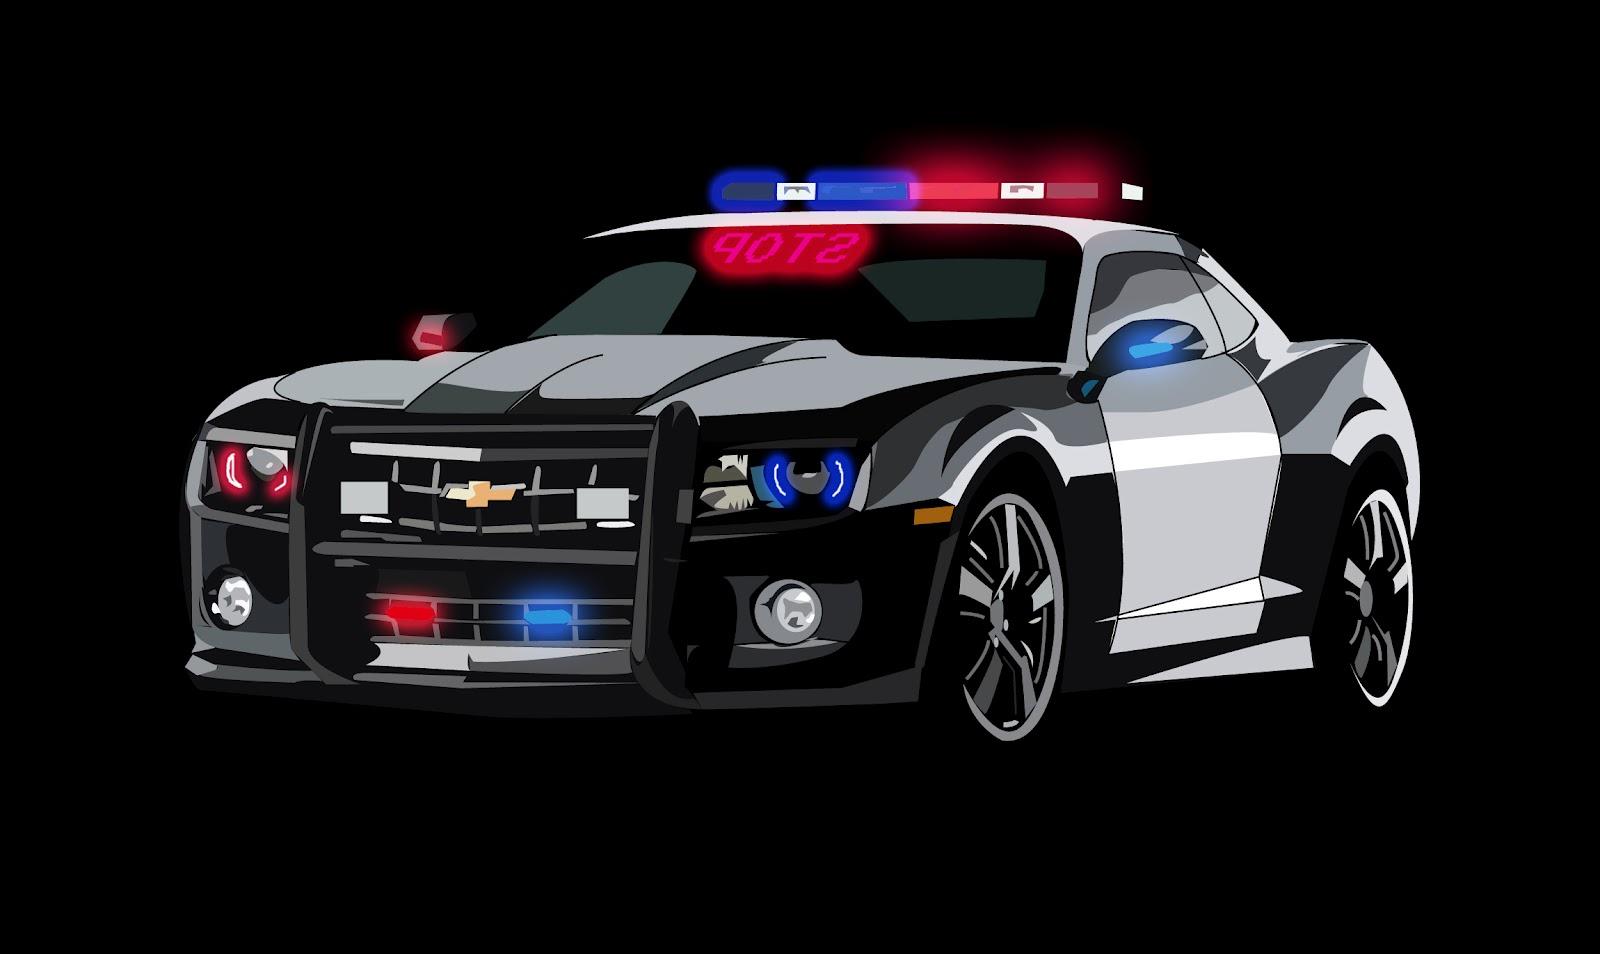 Cool Police Wallpapers